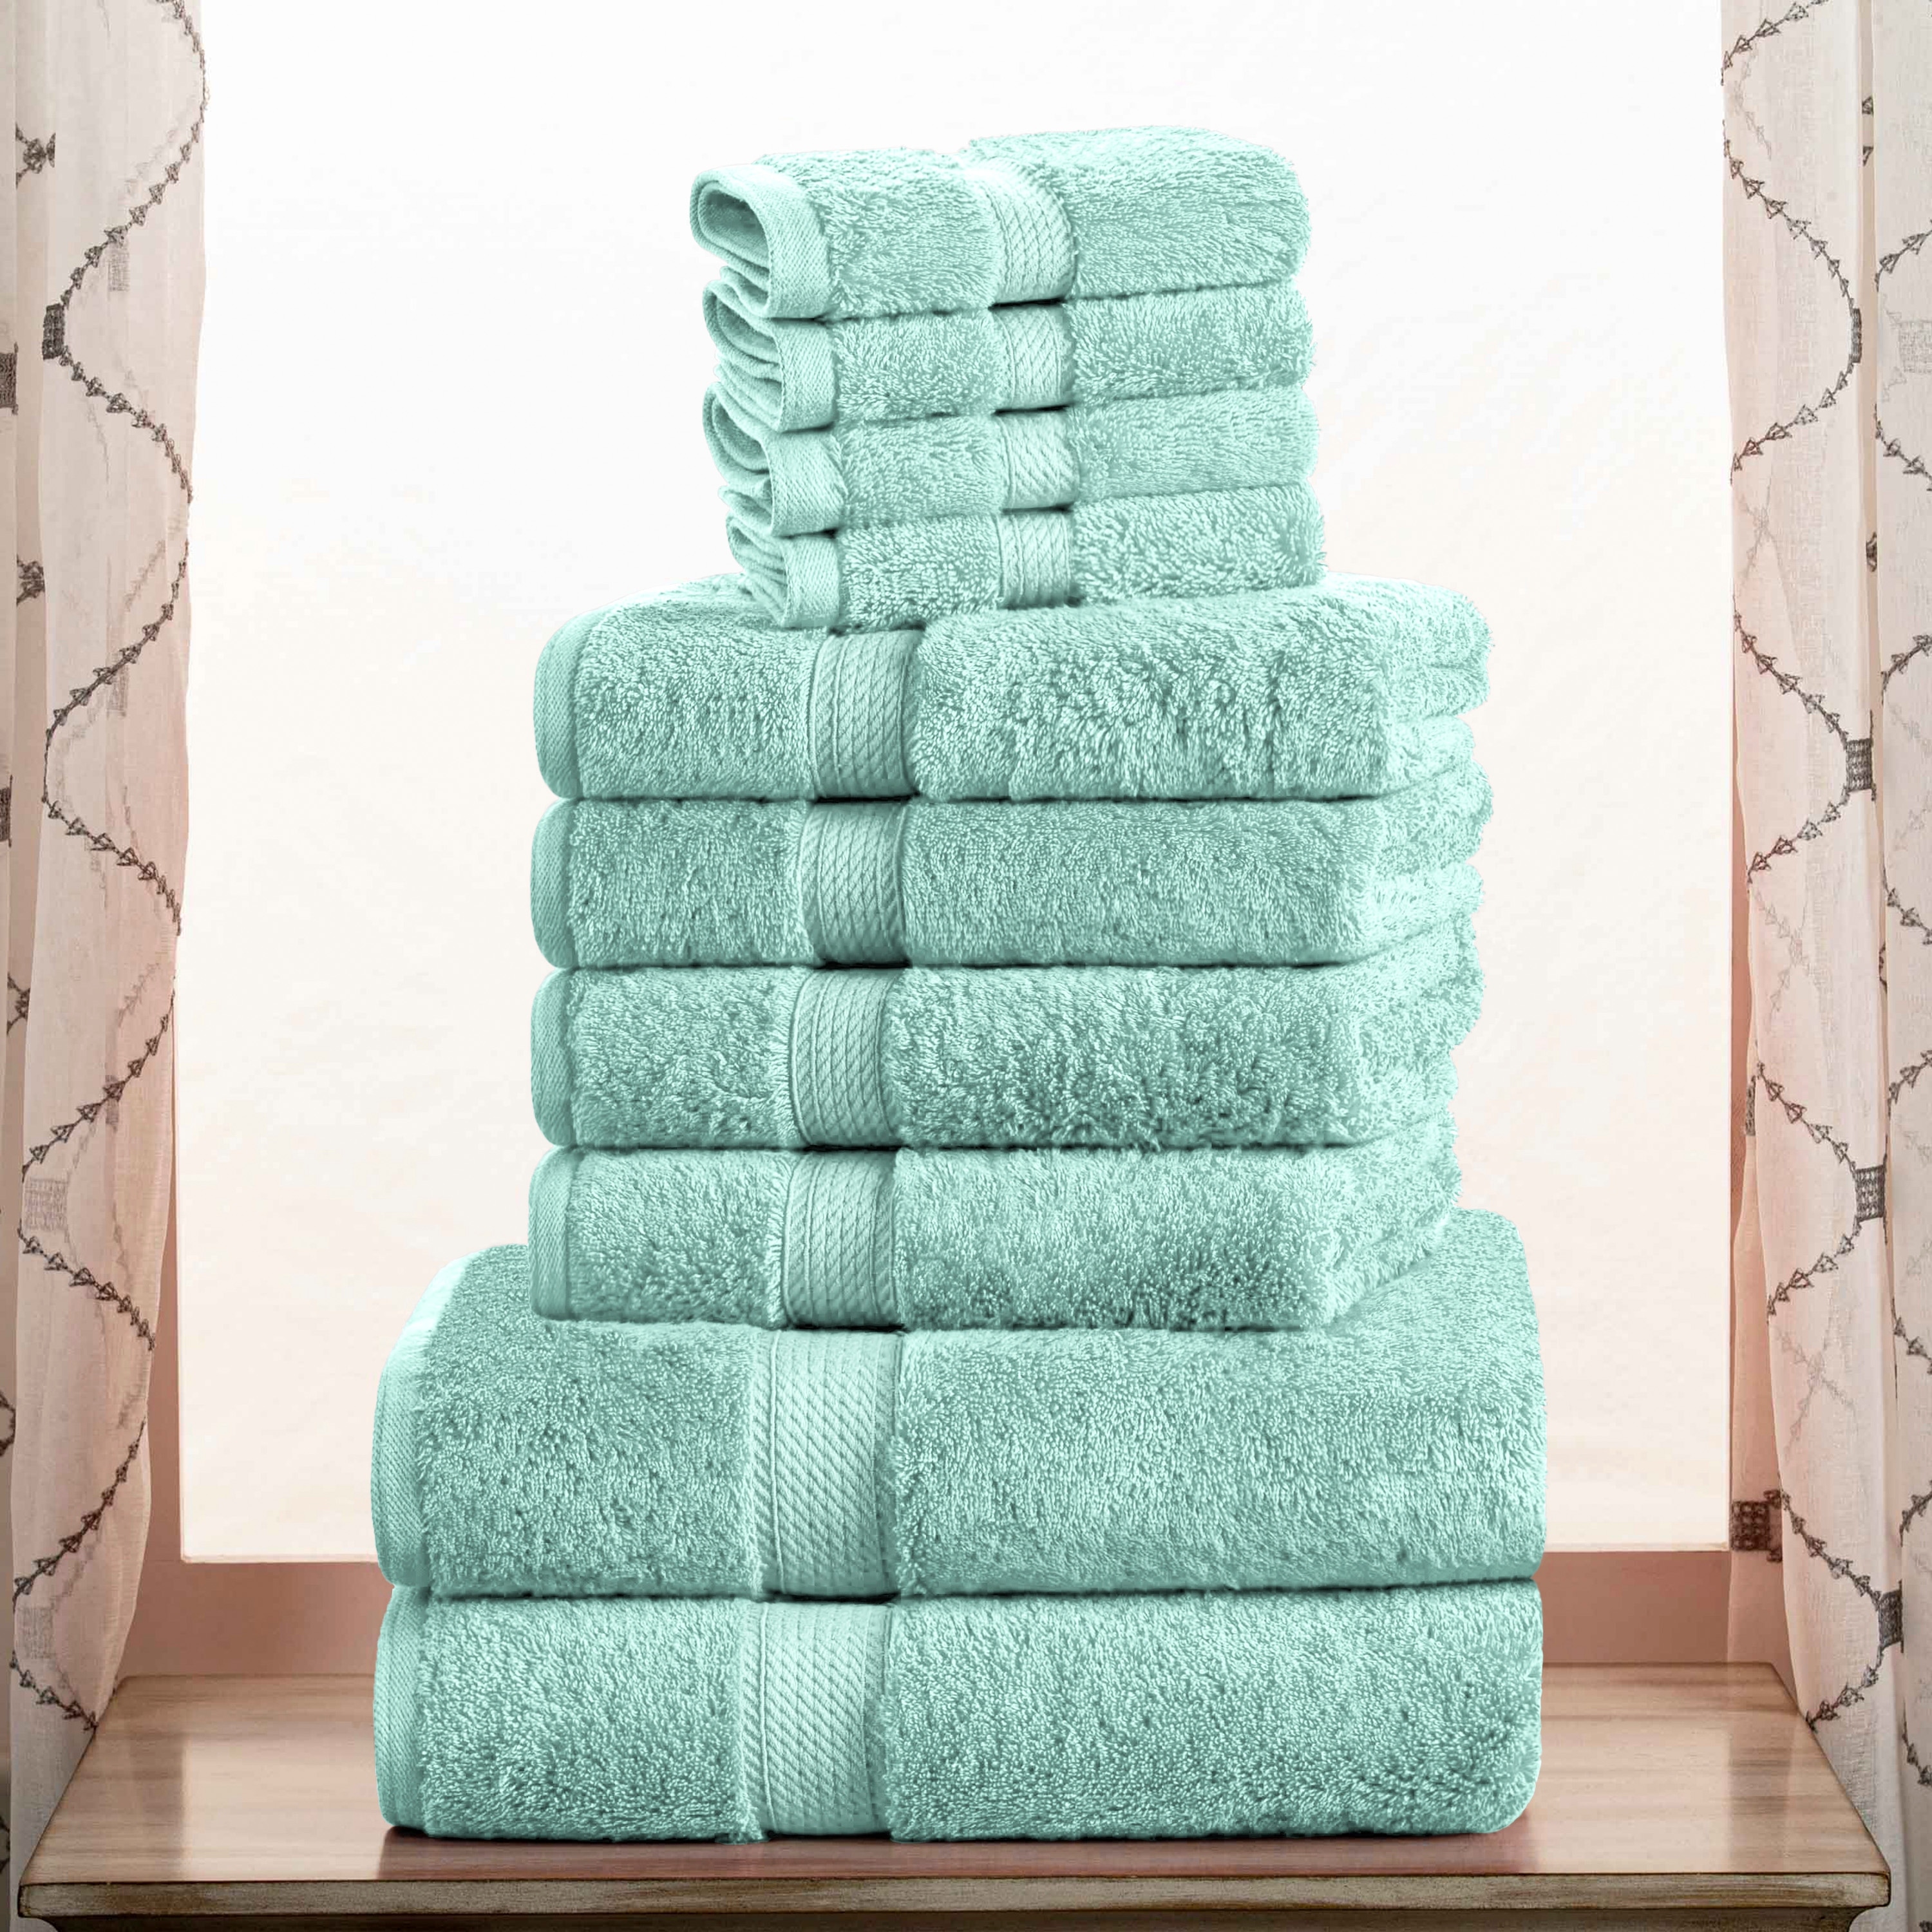 https://ak1.ostkcdn.com/images/products/is/images/direct/77cc84c7aab2aaadaf4970ee7327ab3bcf7a6f14/Egyptian-Cotton-Heavyweight-Solid-Plush-Towel-Set-by-Superior.jpg